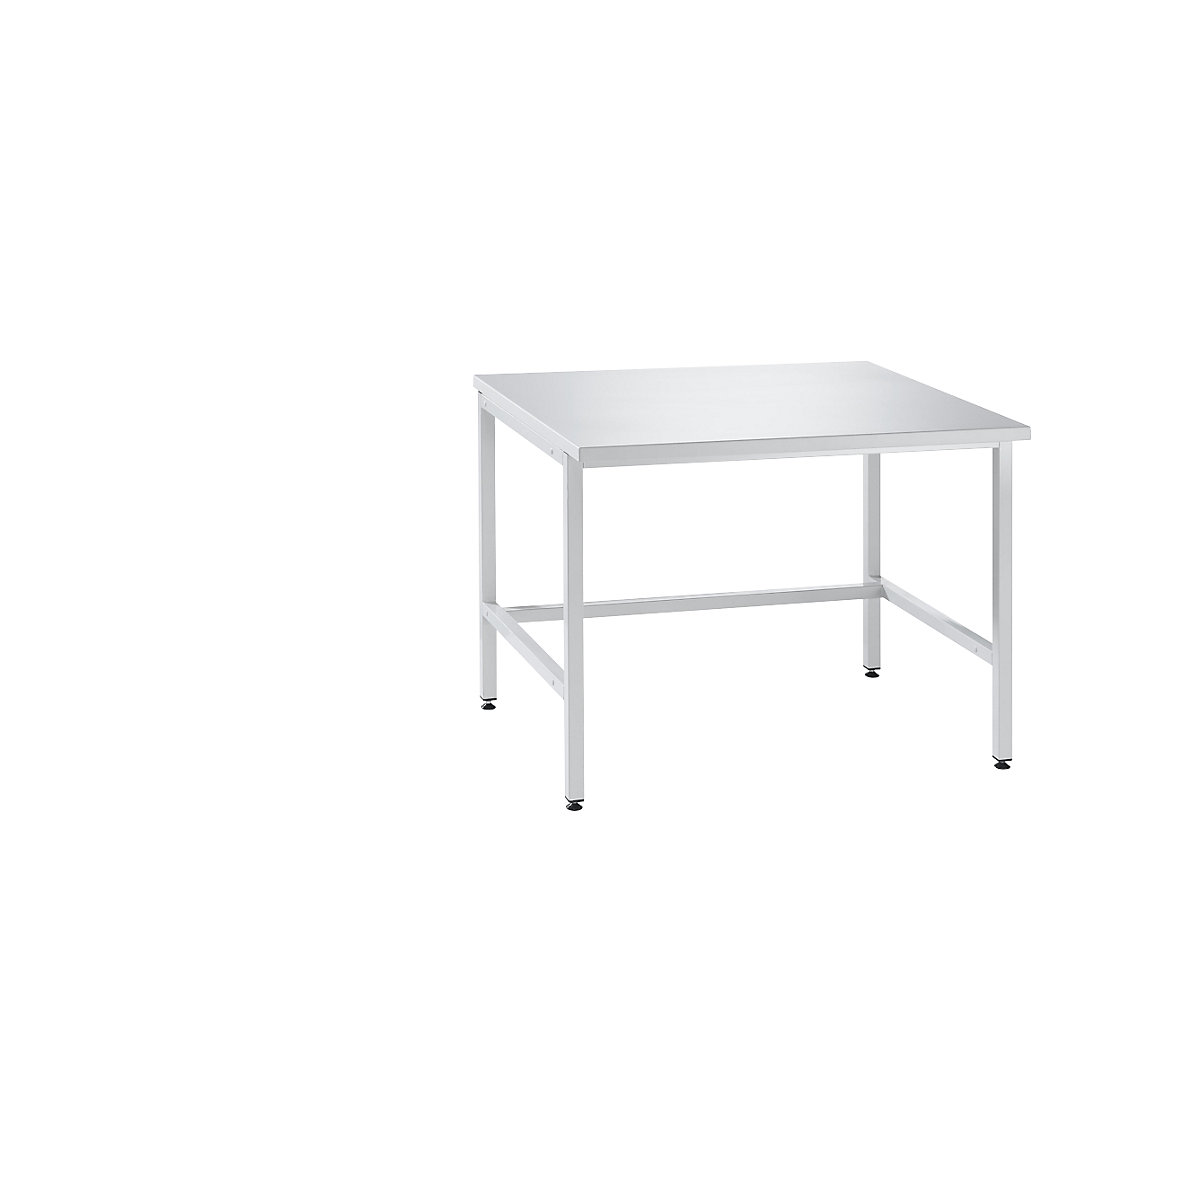 Laboratory table with H-leg frame